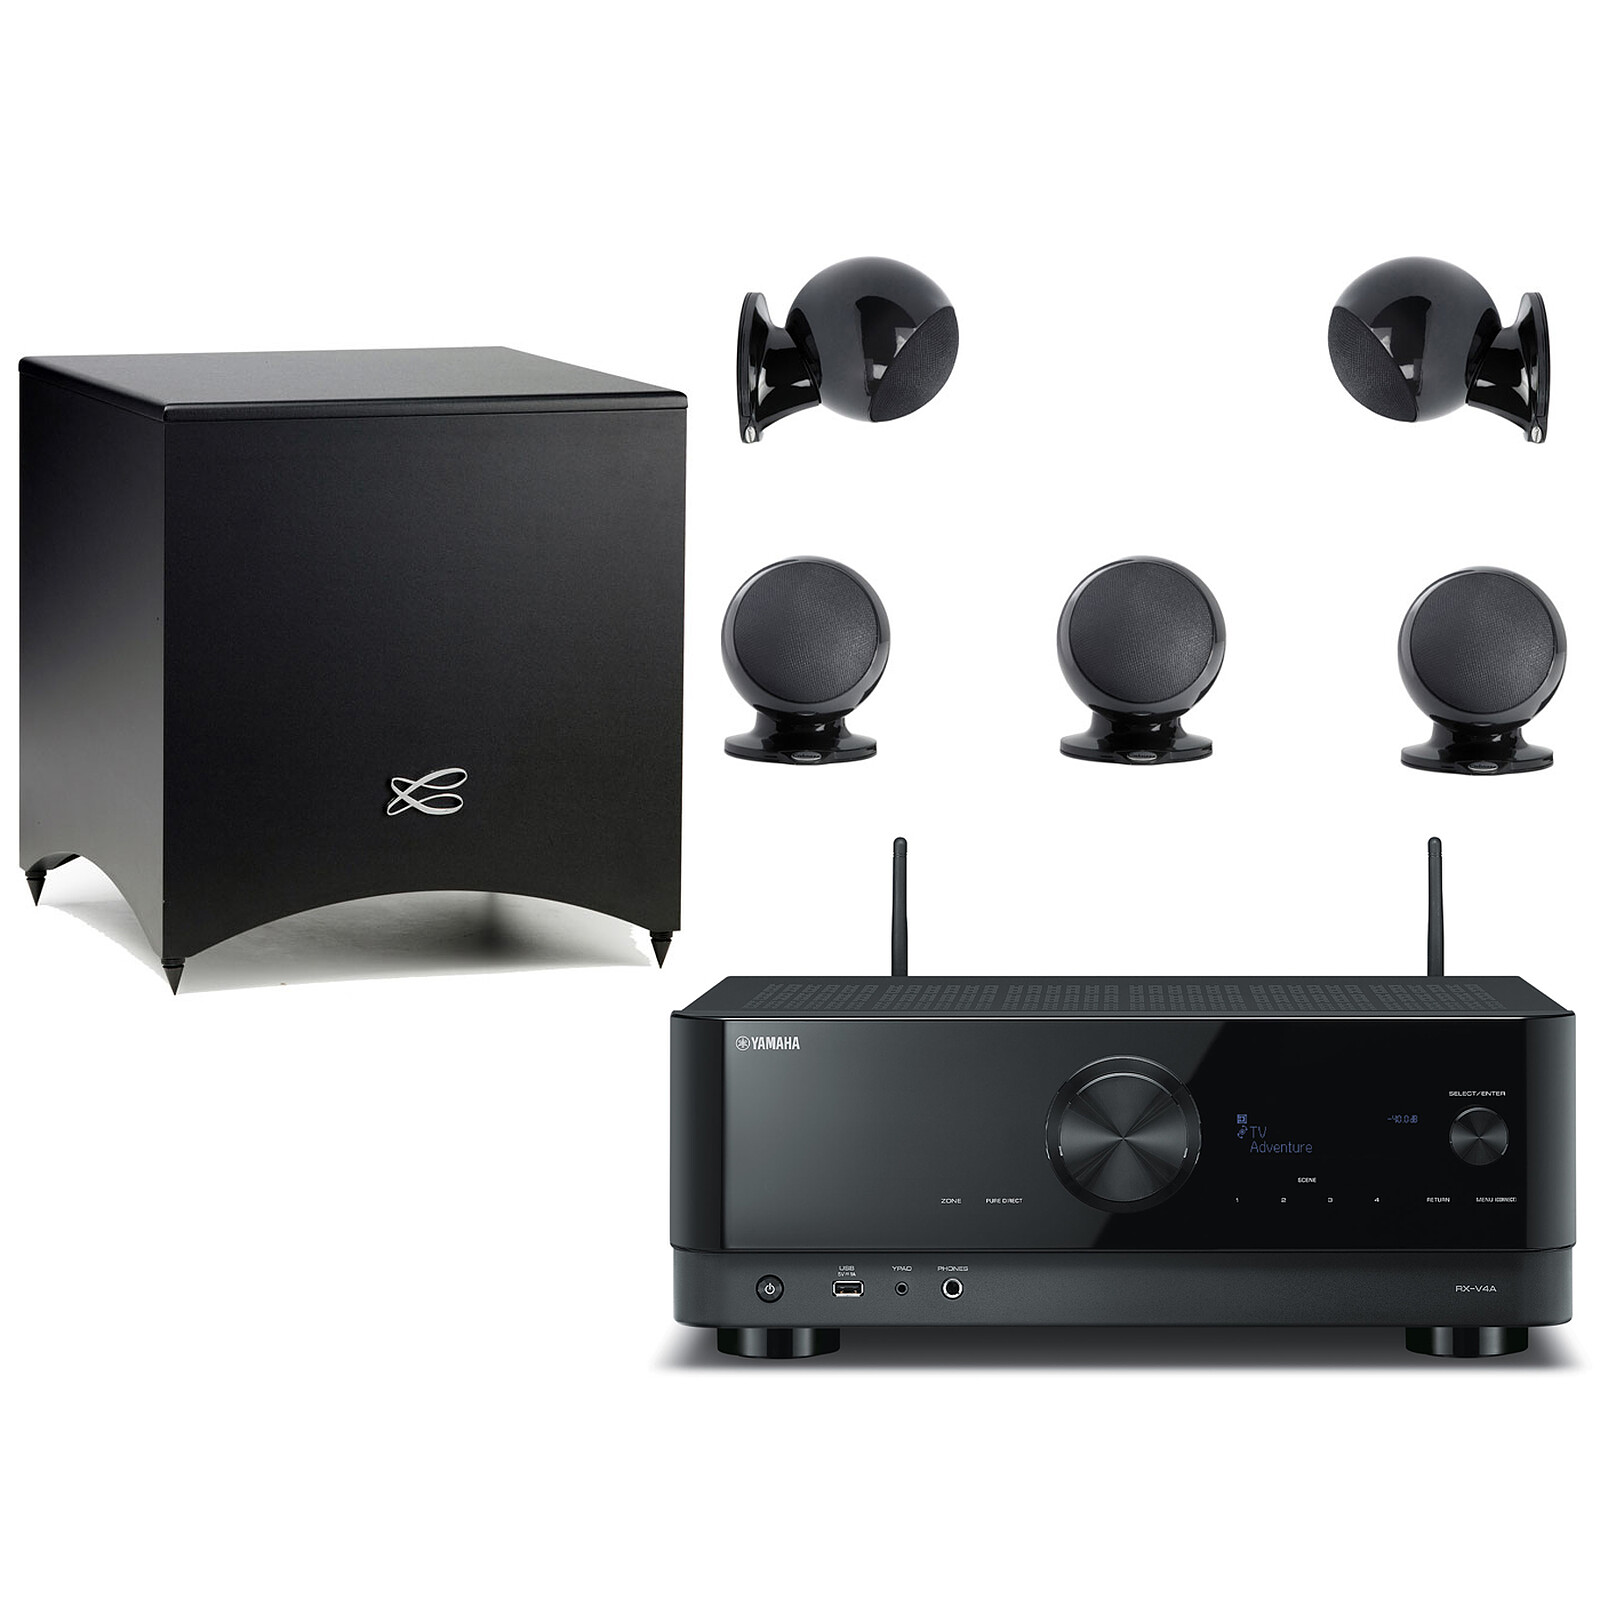 Home Cinema Systems - Cabasse